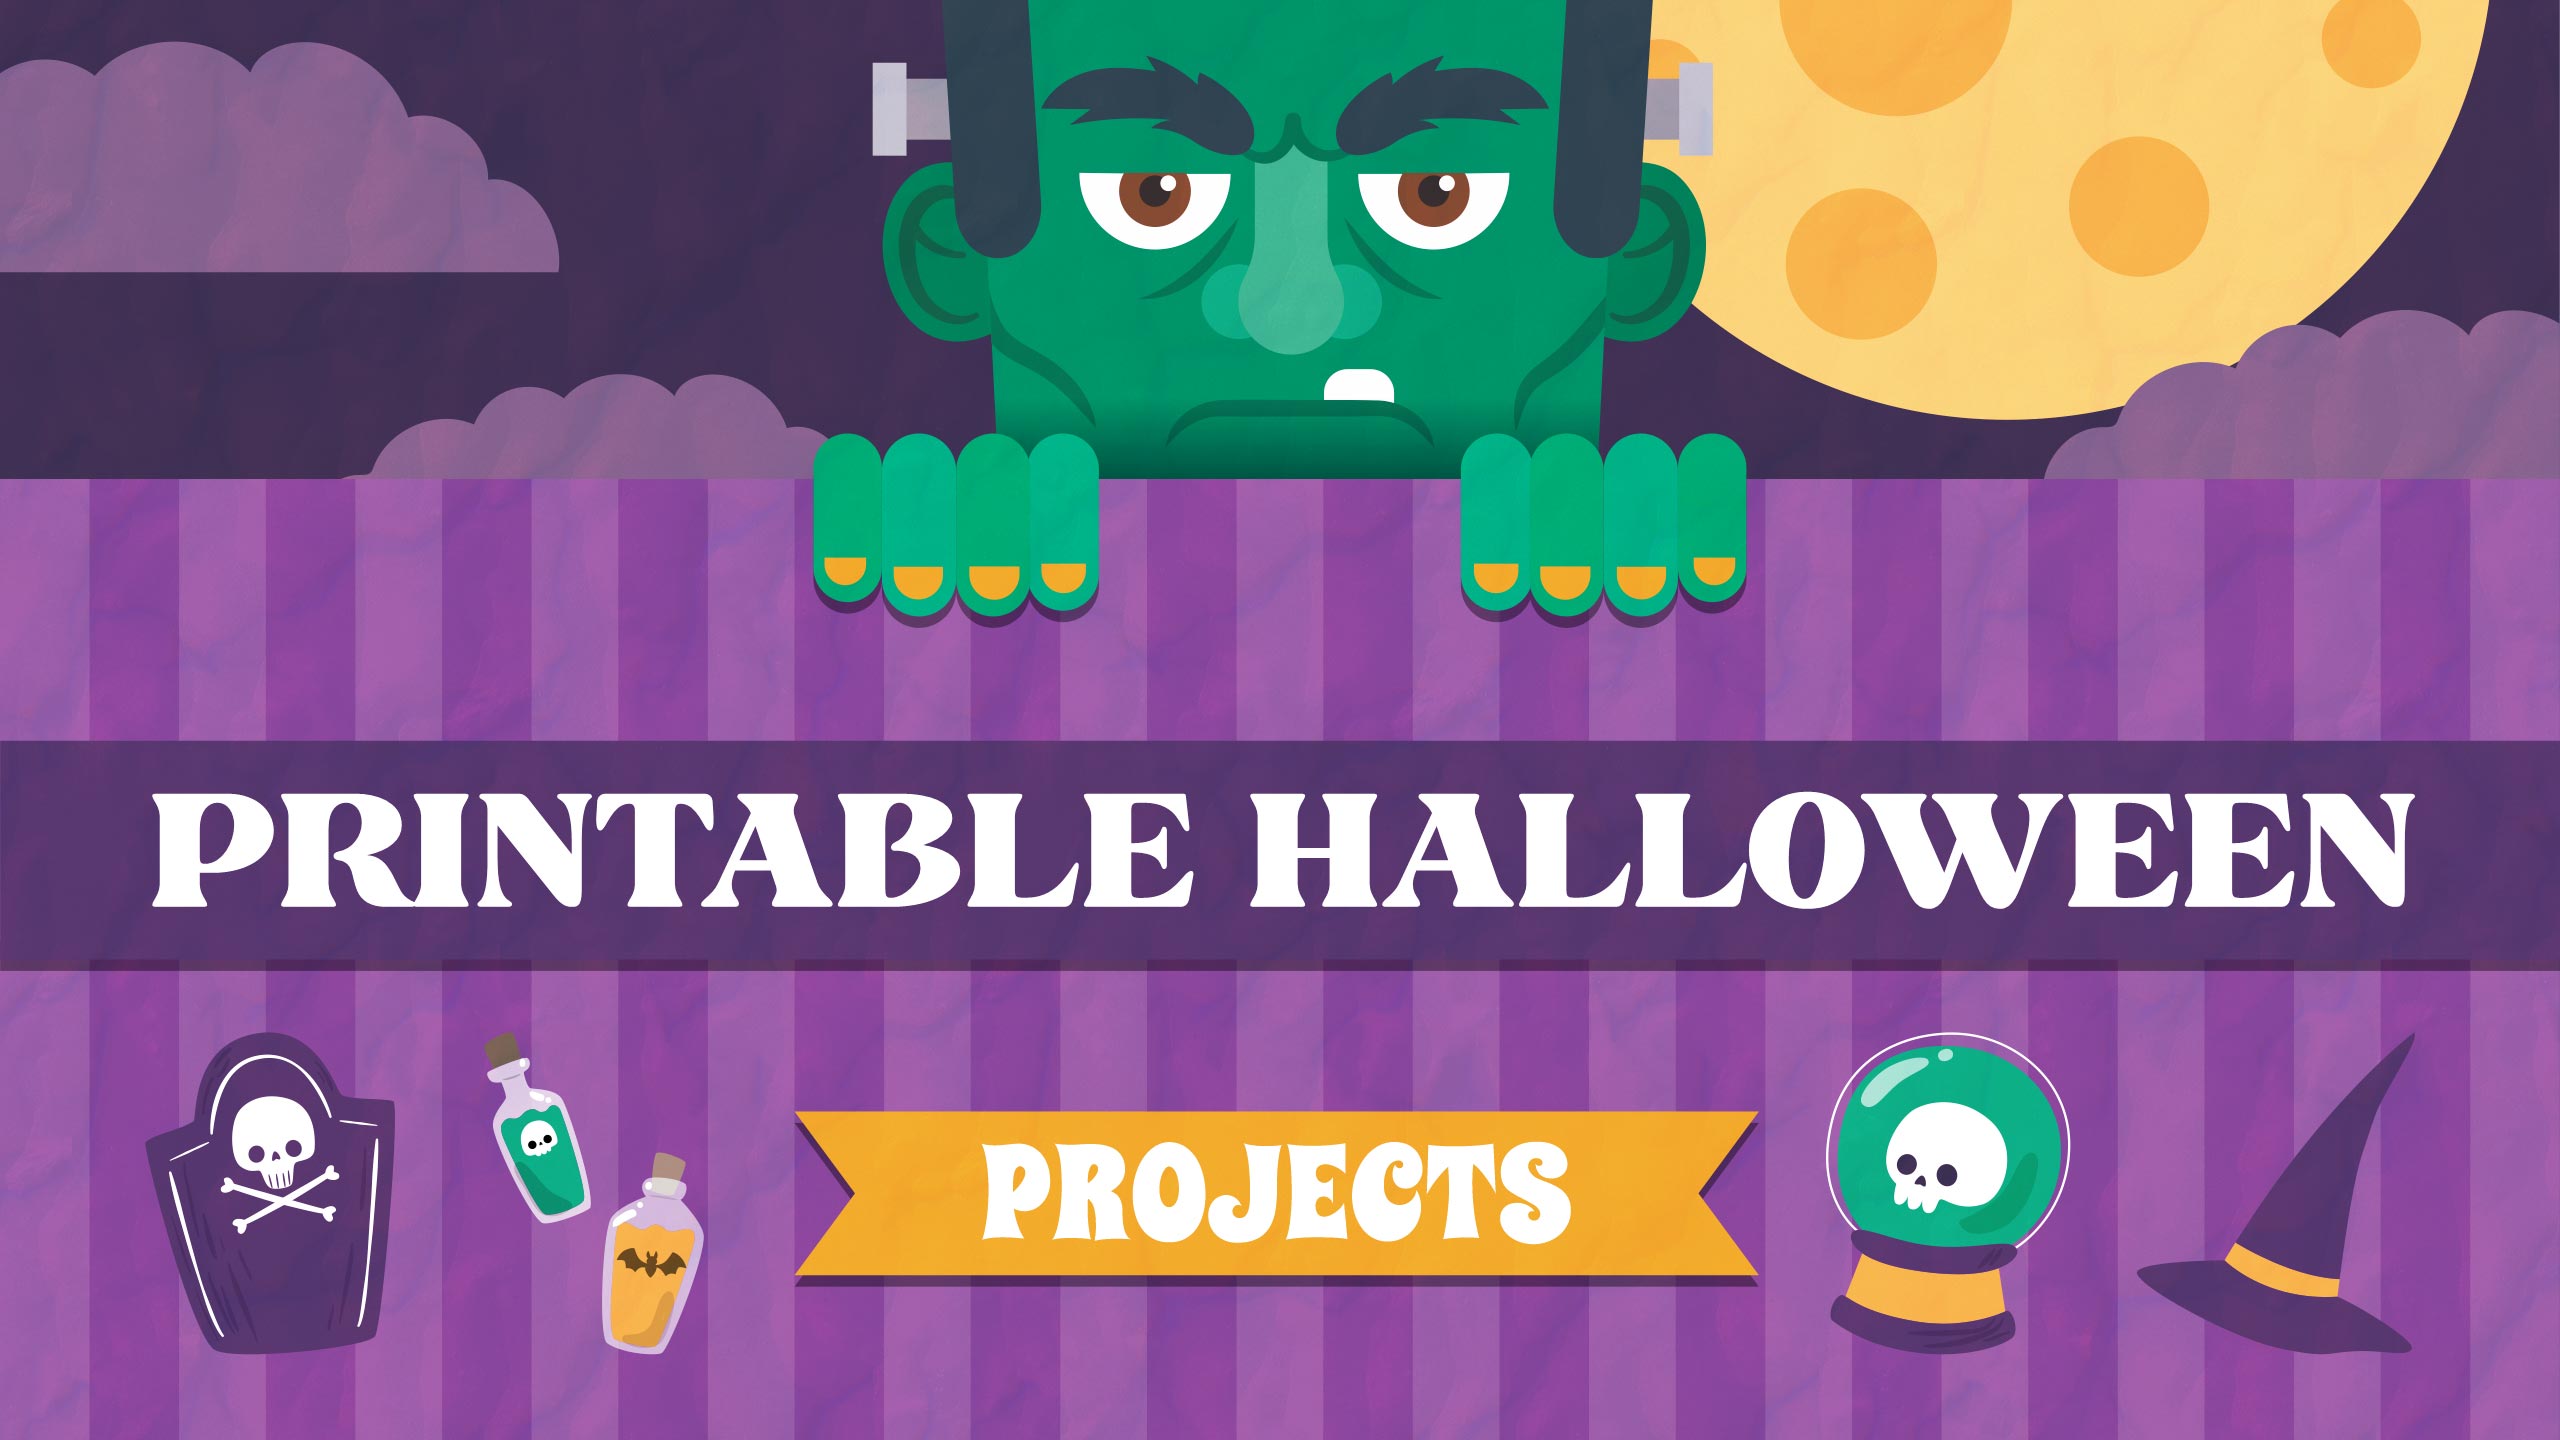 Printable Halloween Projects